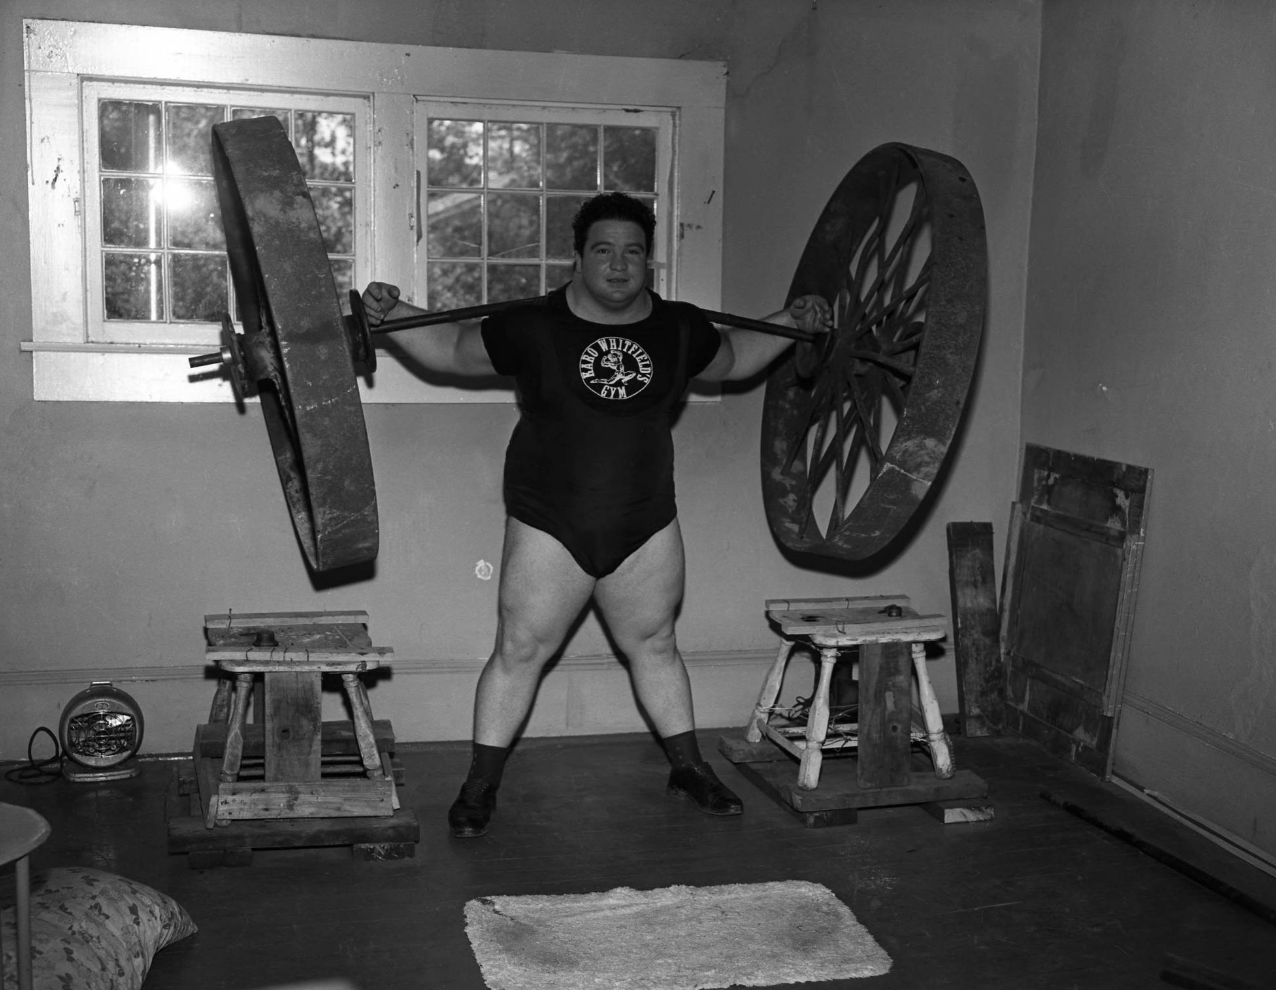 American weightlifter Paul Anderson lifted 6,270 pounds, “the greatest weight ever raised by a human being.” It is widely believed he lifted more in other undocumented attempts. 